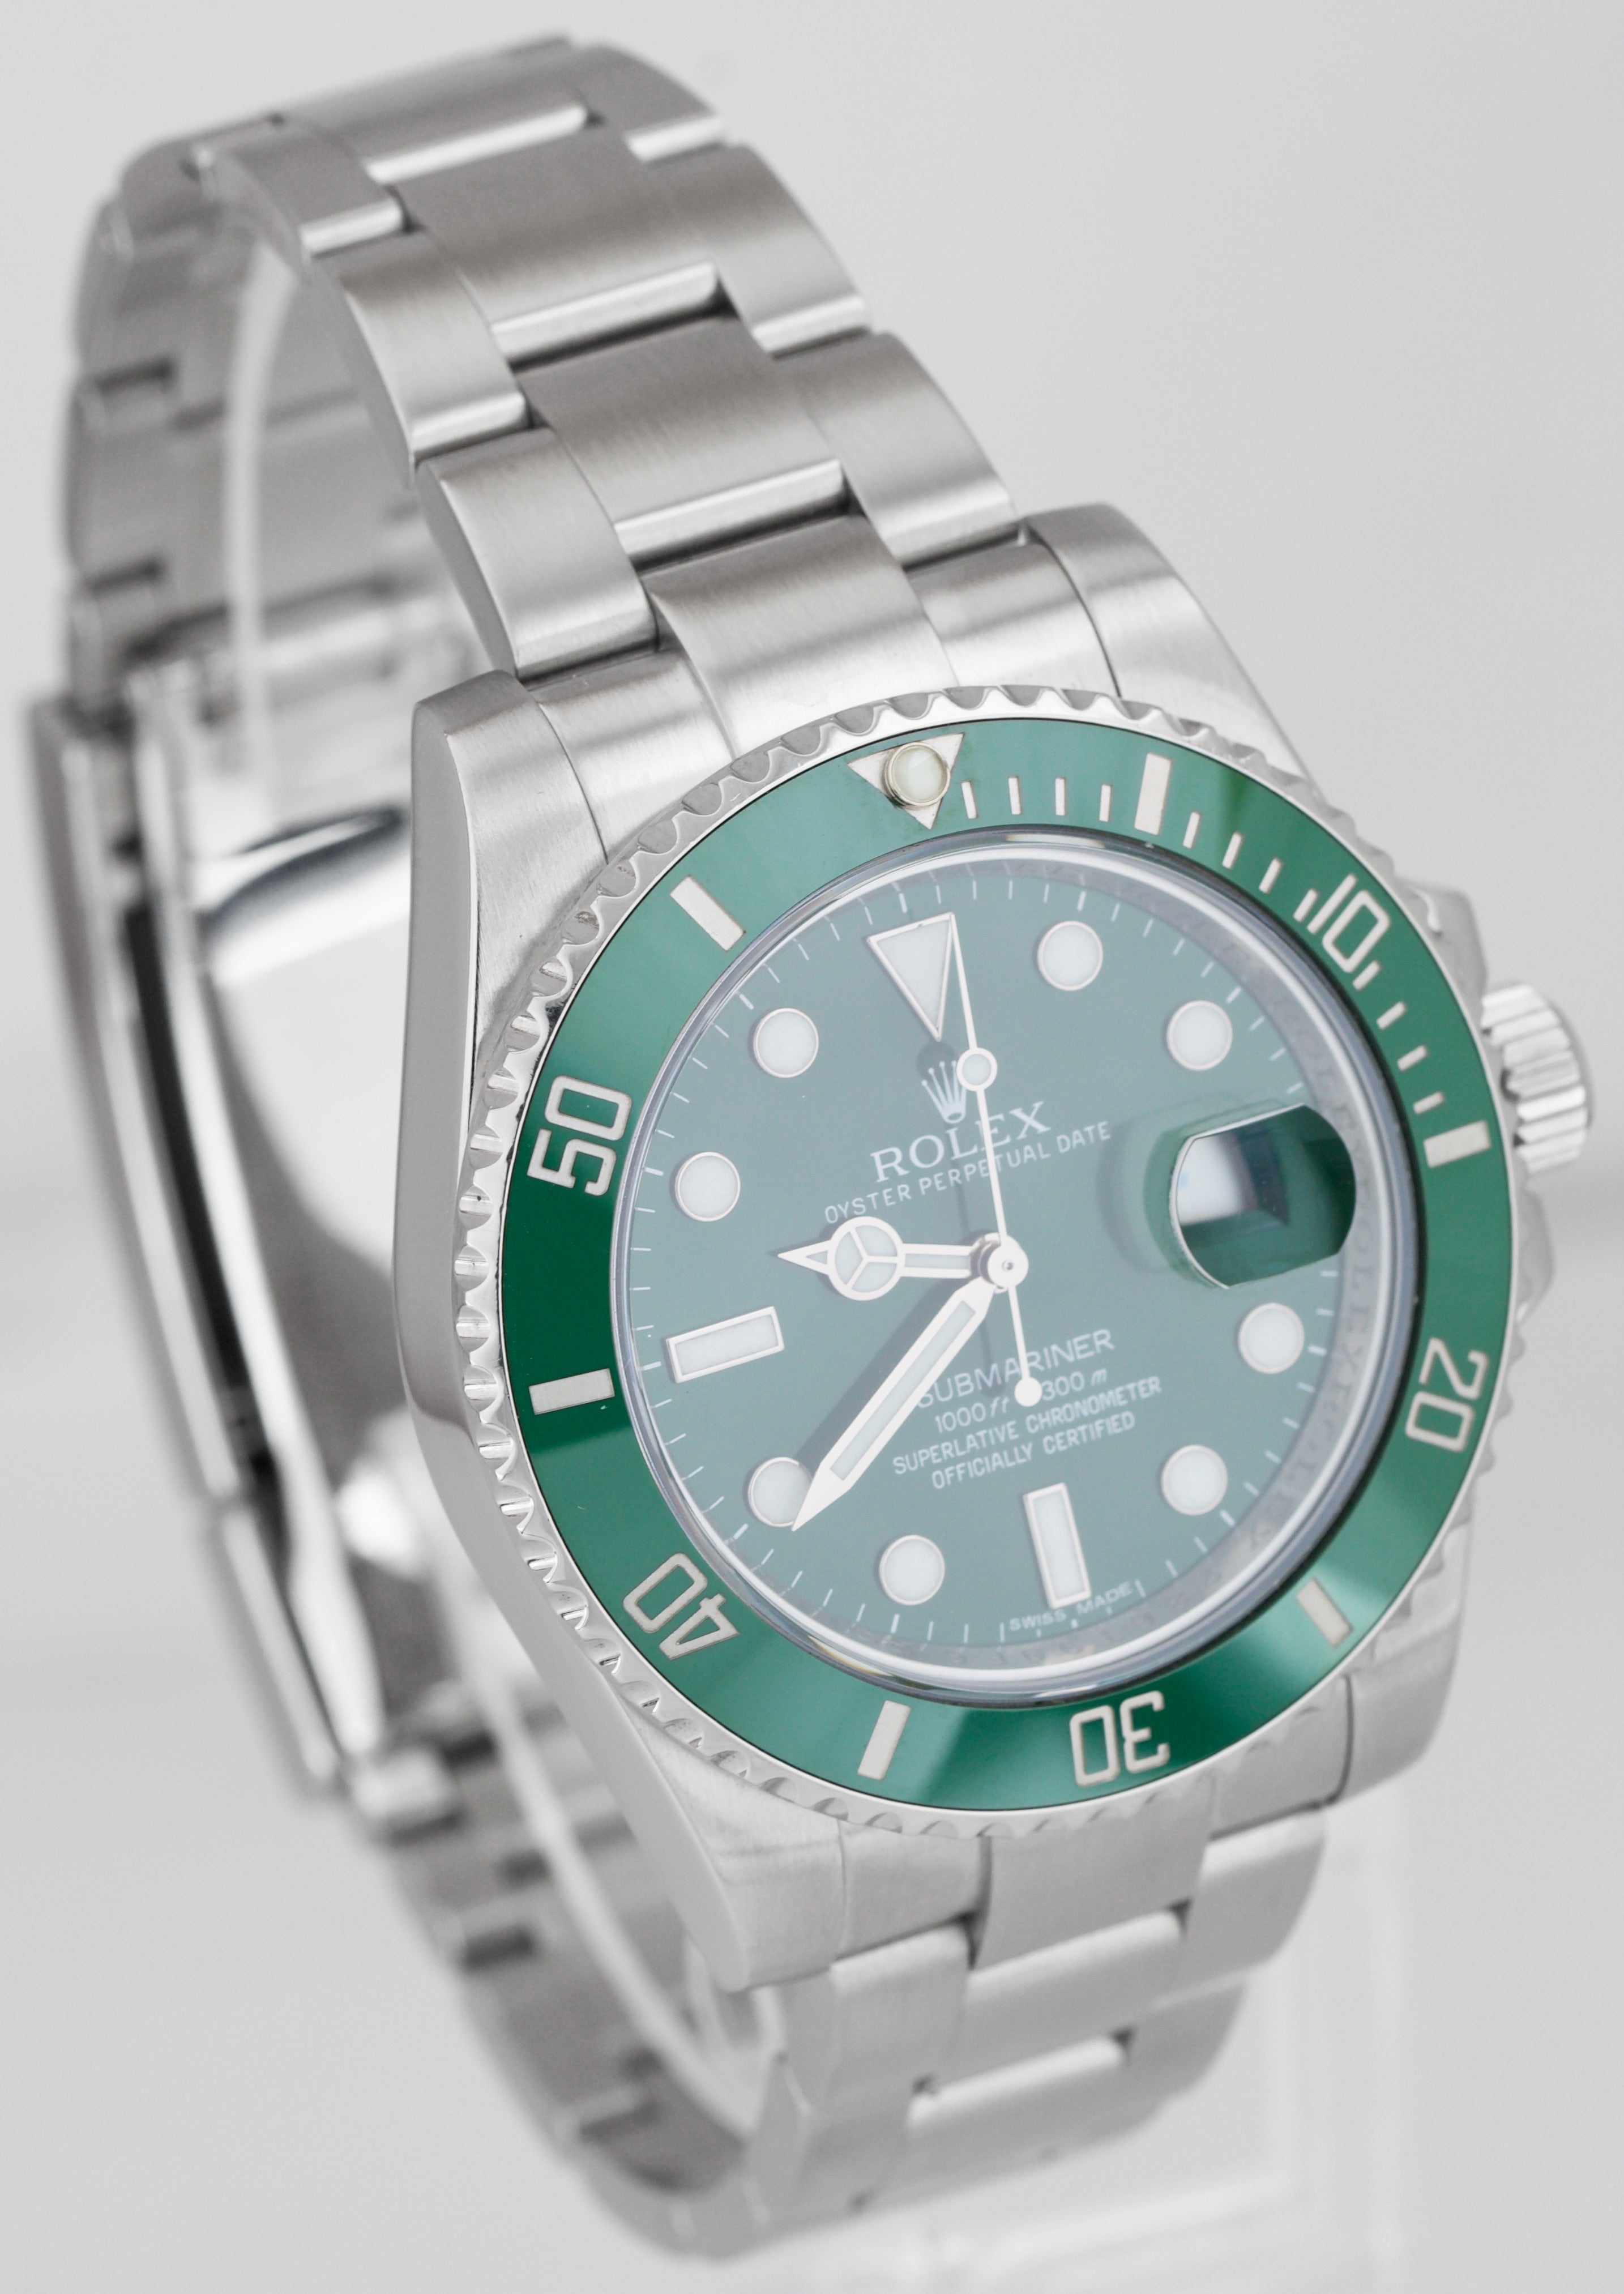 Rolex Steel Submariner Date Watch - The Hulk - Green Dial 116610 LV —  Boston Time Pieces